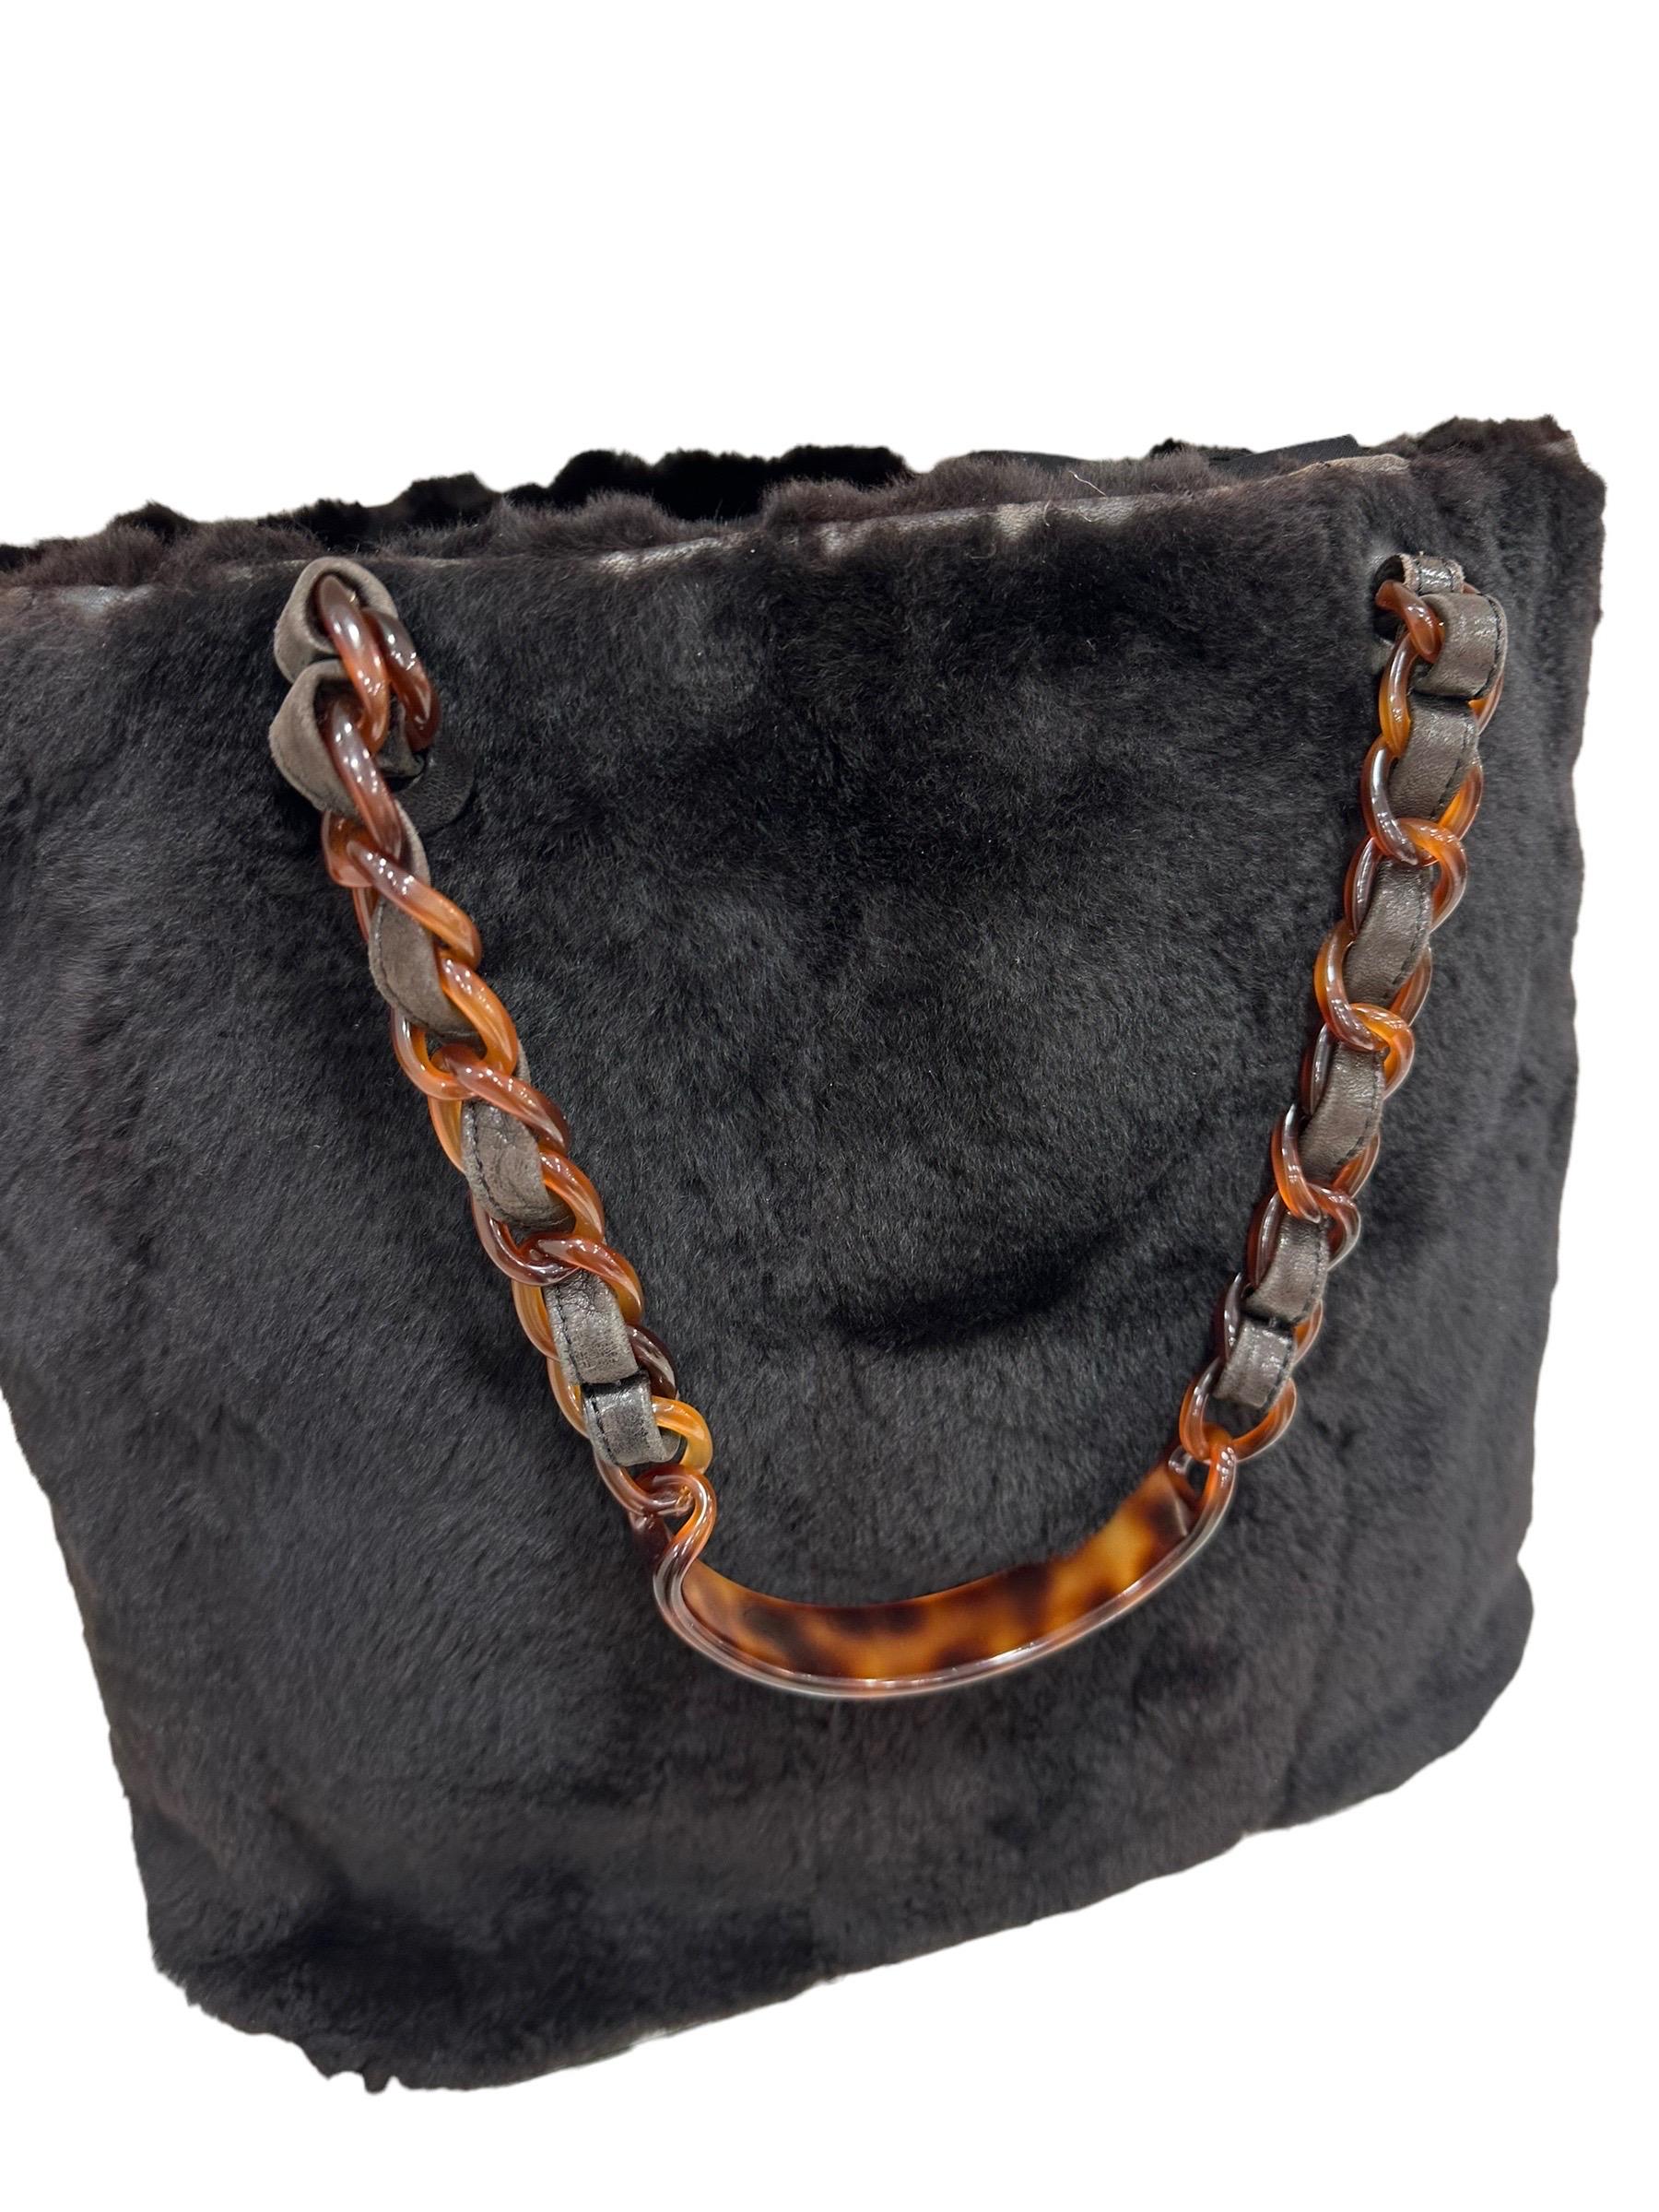 .Chanel Vintage shopper bag made with a dark brown fur with dark silver hardware. It has a large central opening equipped with a double magnetic button closure. The interior is lined with a smooth brown leather and is equipped with two pockets with